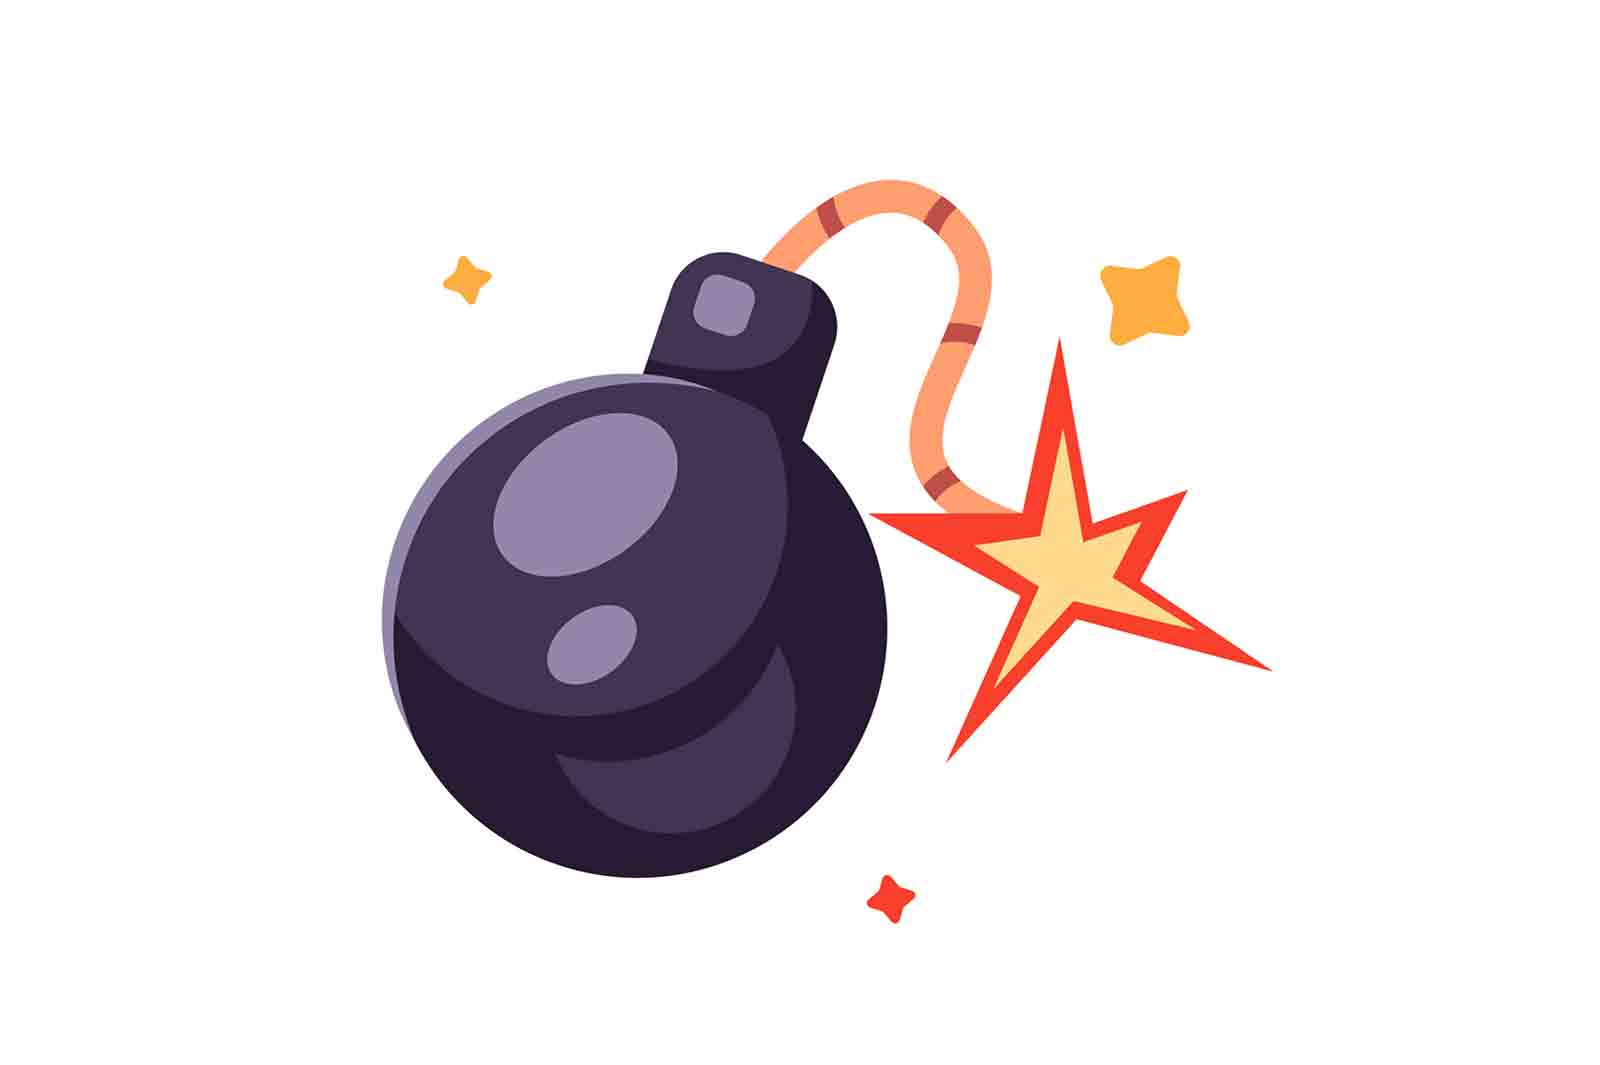 Ignited bomb icon with fuse and spark isolated on white background, flat vector illustration.